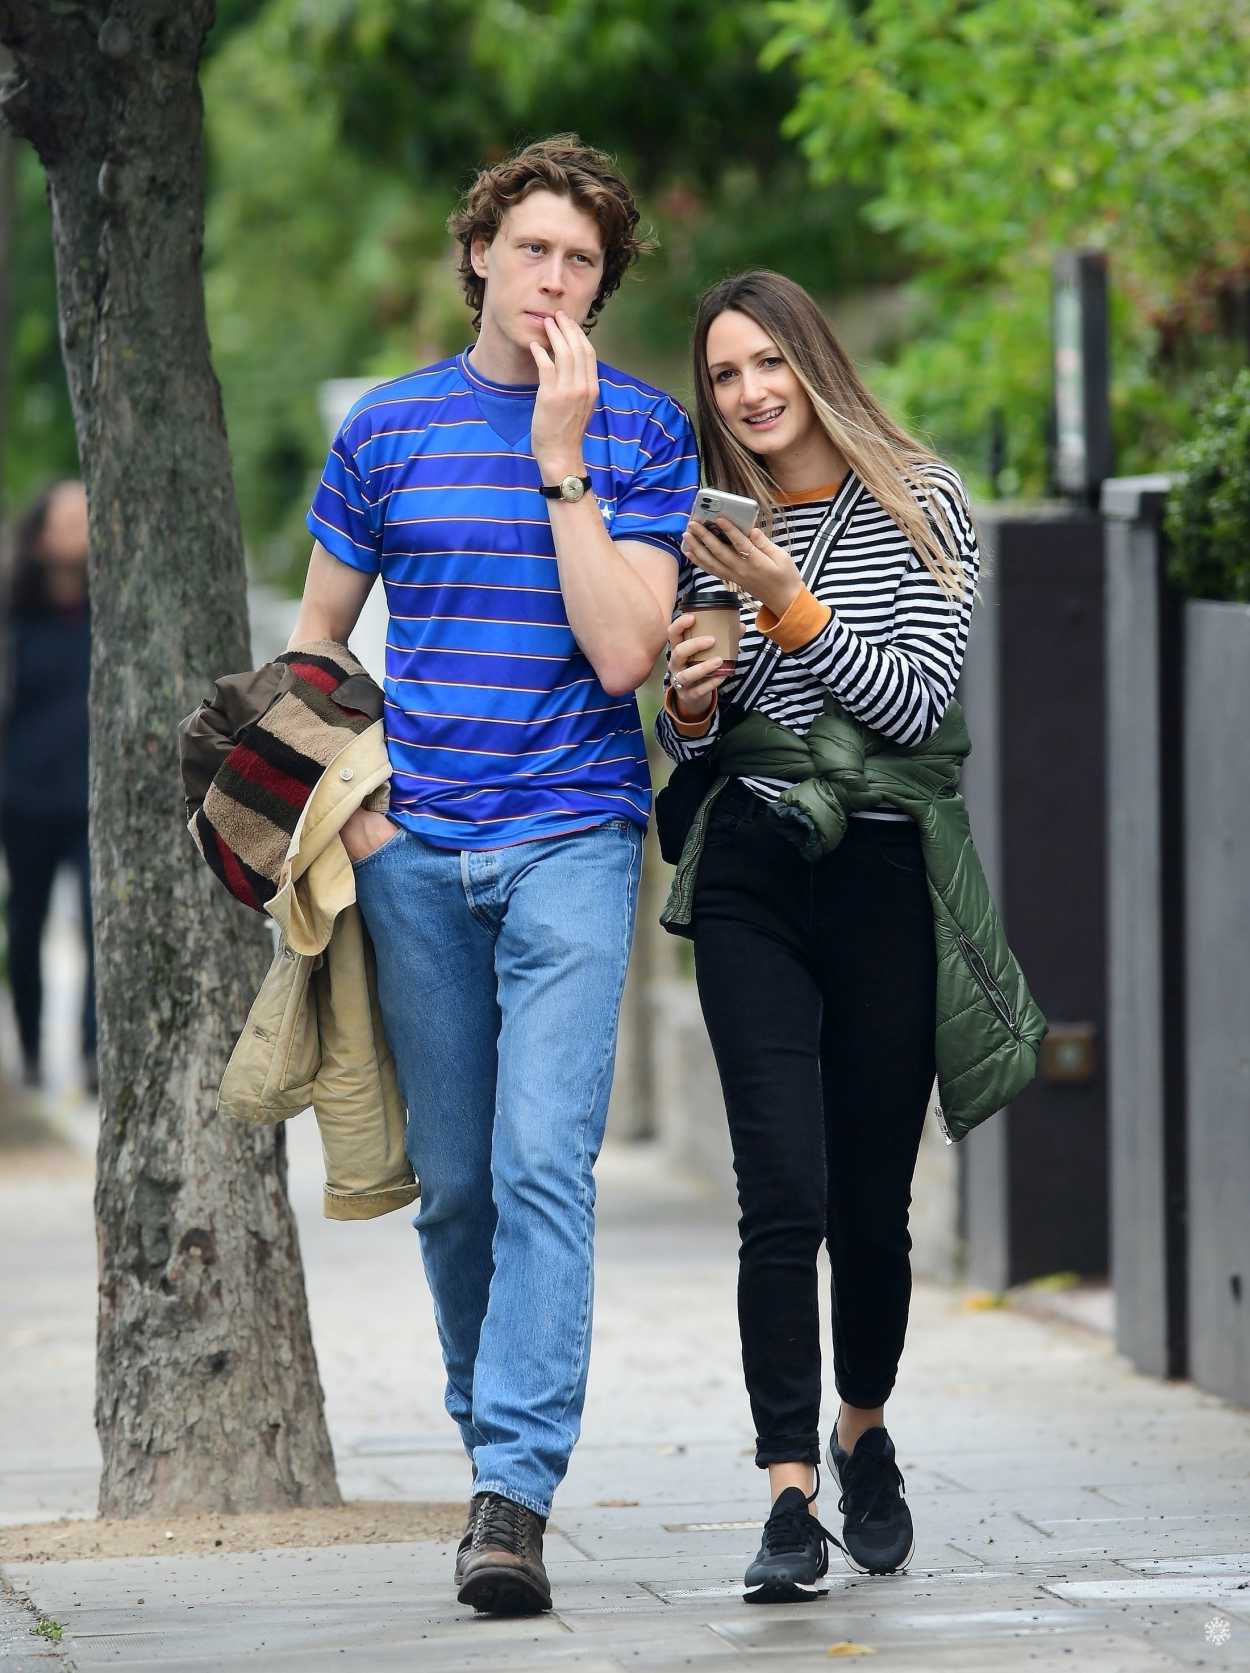 George MacKay in a Blue Striped T-Shirt Was Seen Out with His Girlfriend in...